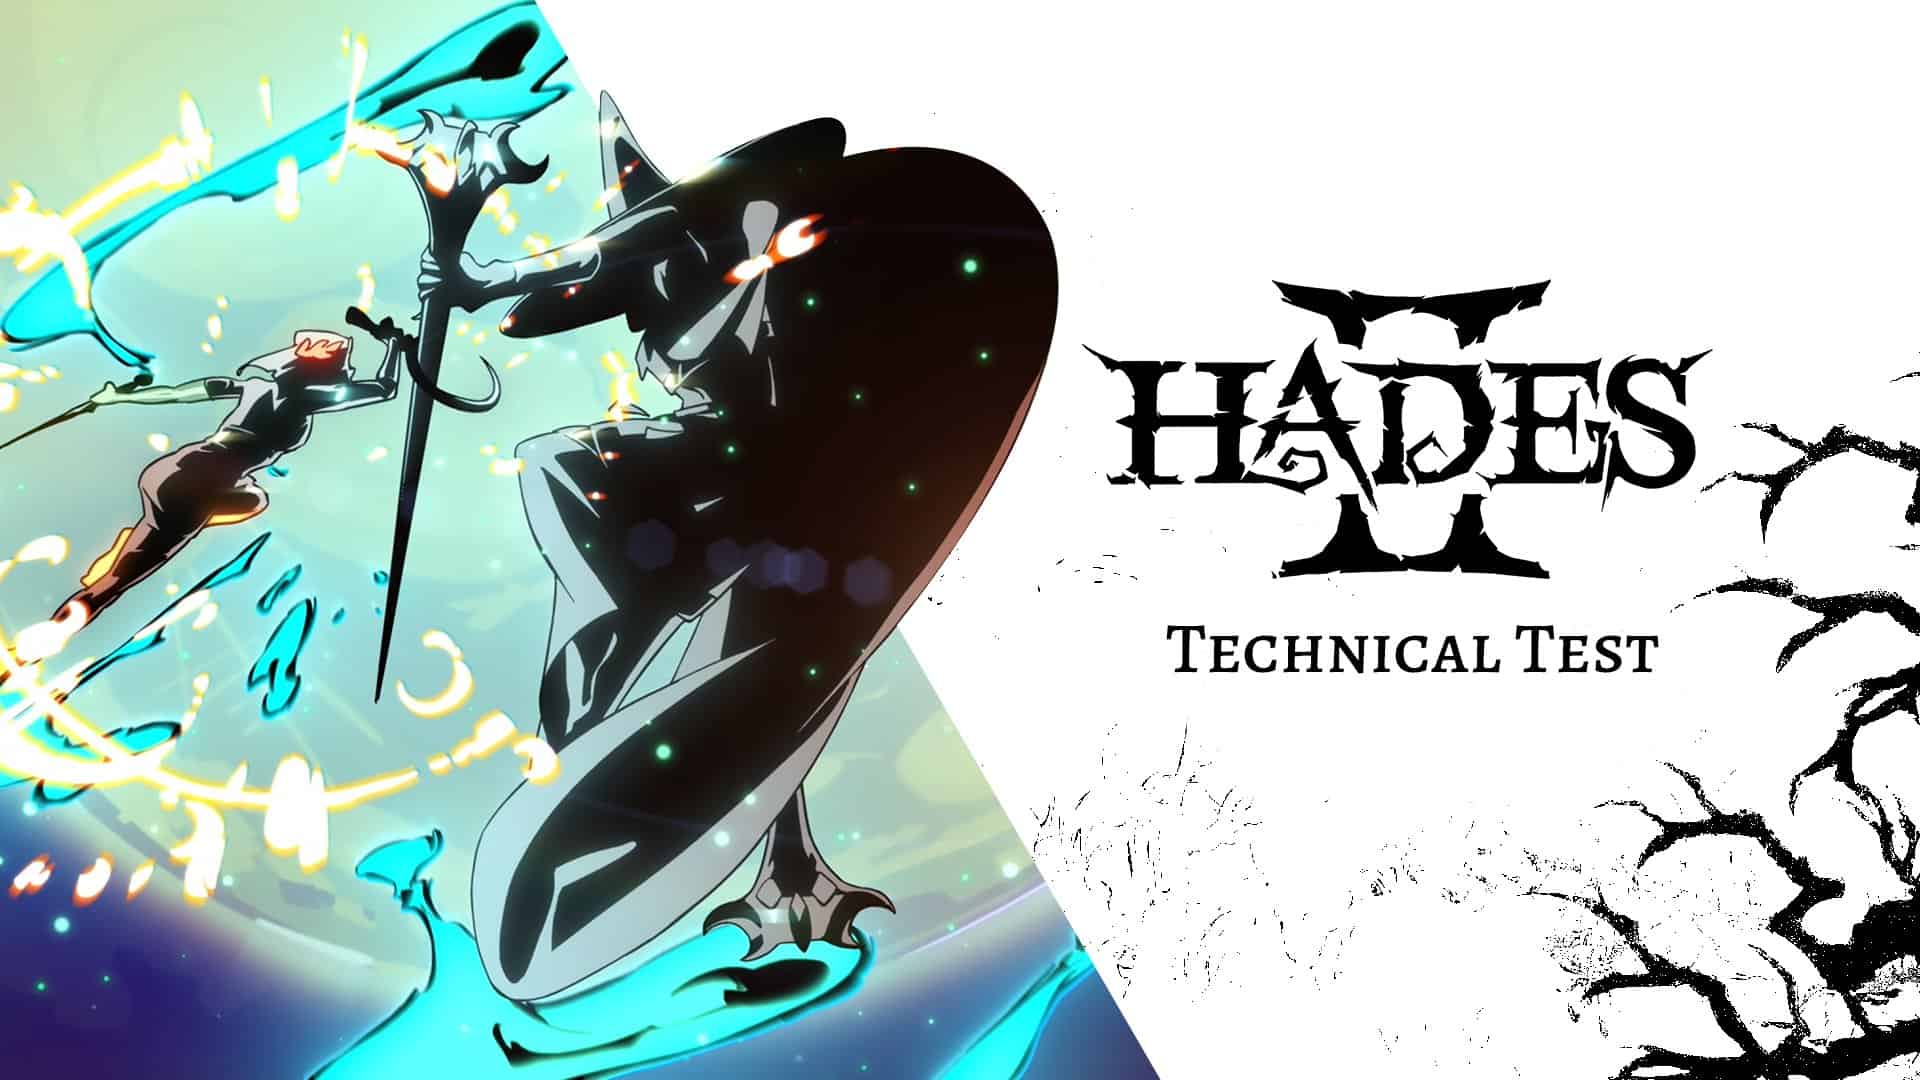 Hades 2 release date technical test: official artwork of Hades 2 shows two shadowy characters 